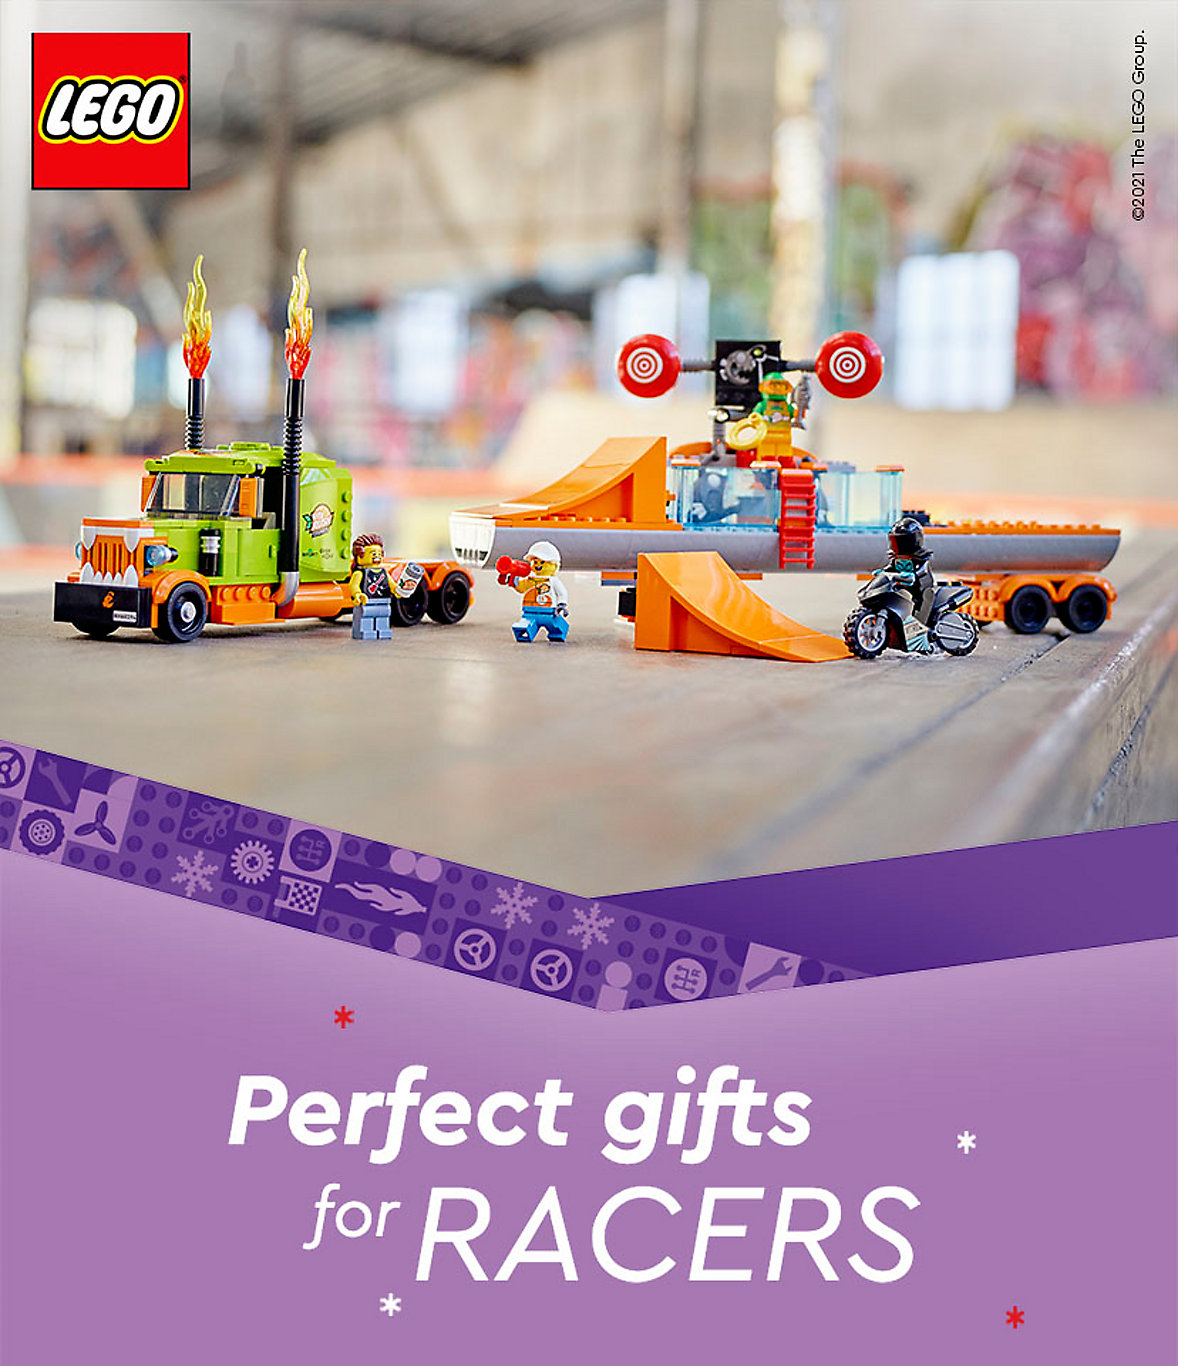 The perfect LEGO gifts for RACERS